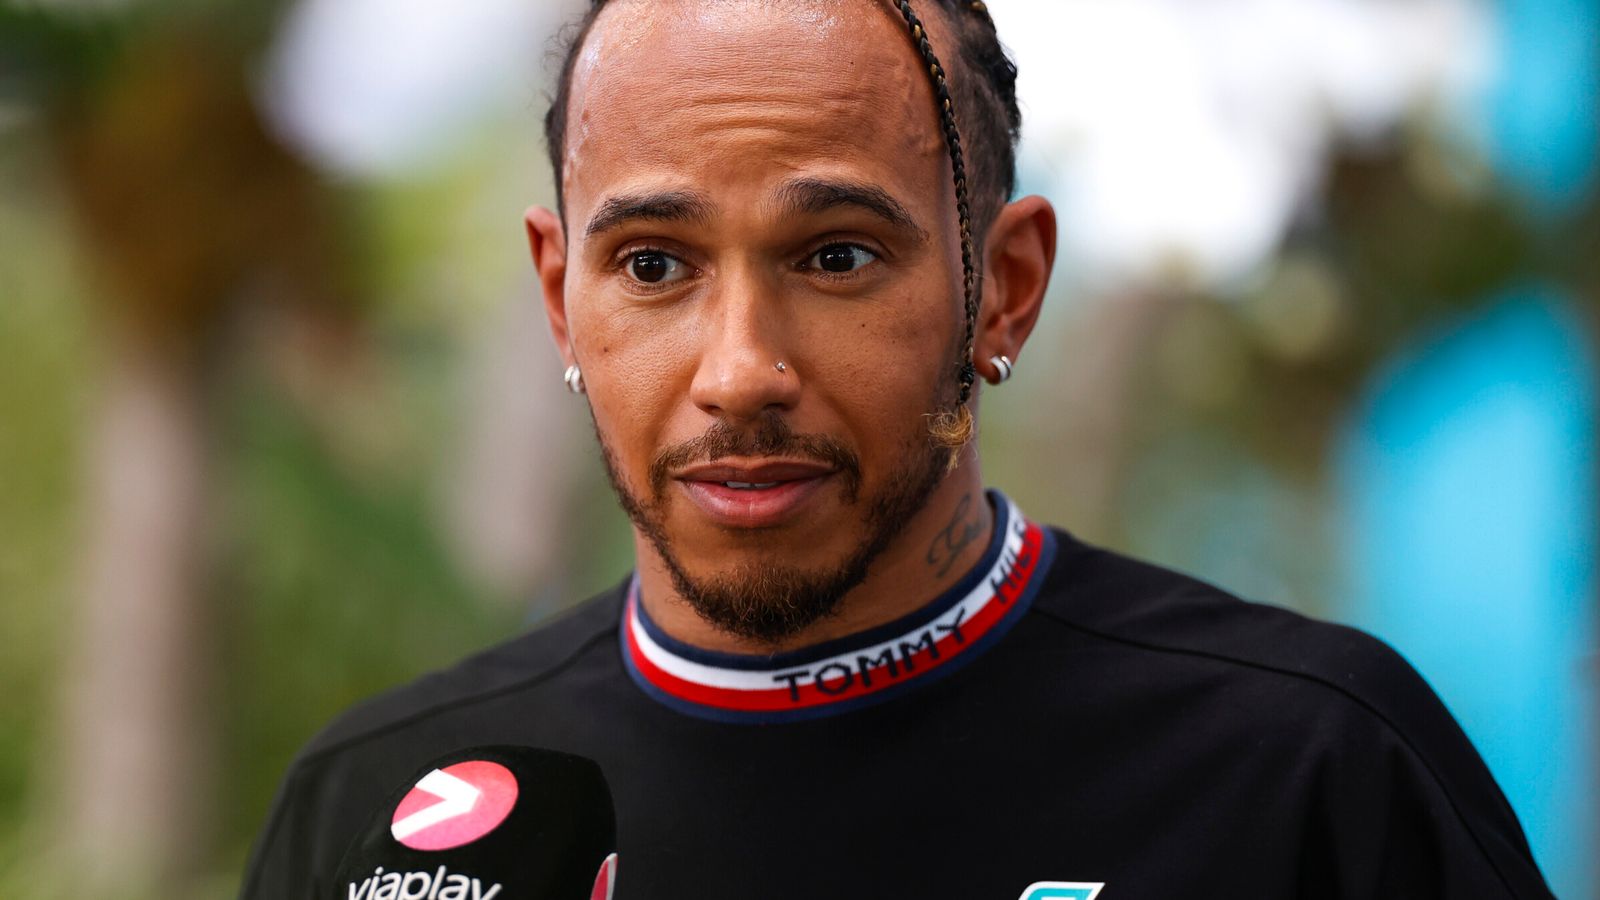 Lewis Hamilton unlikely to face sanction over wearing piercings at Monaco GP this weekend